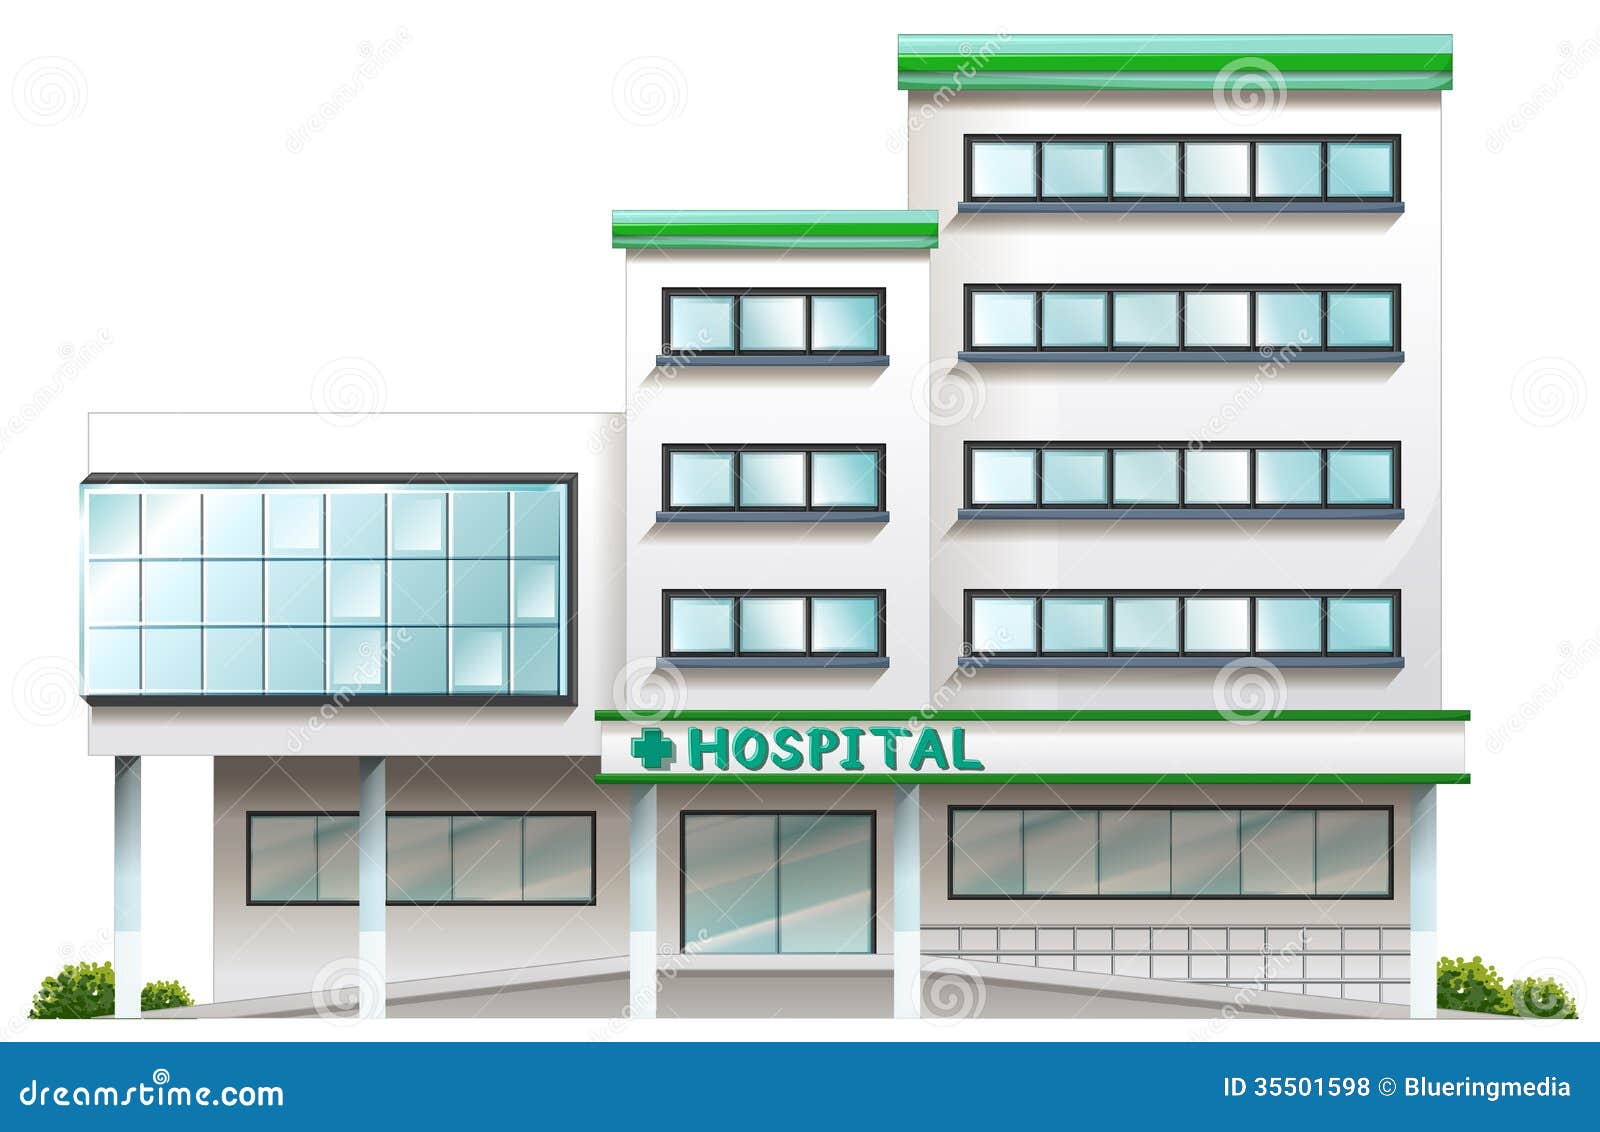 clip art pictures hospital - photo #48